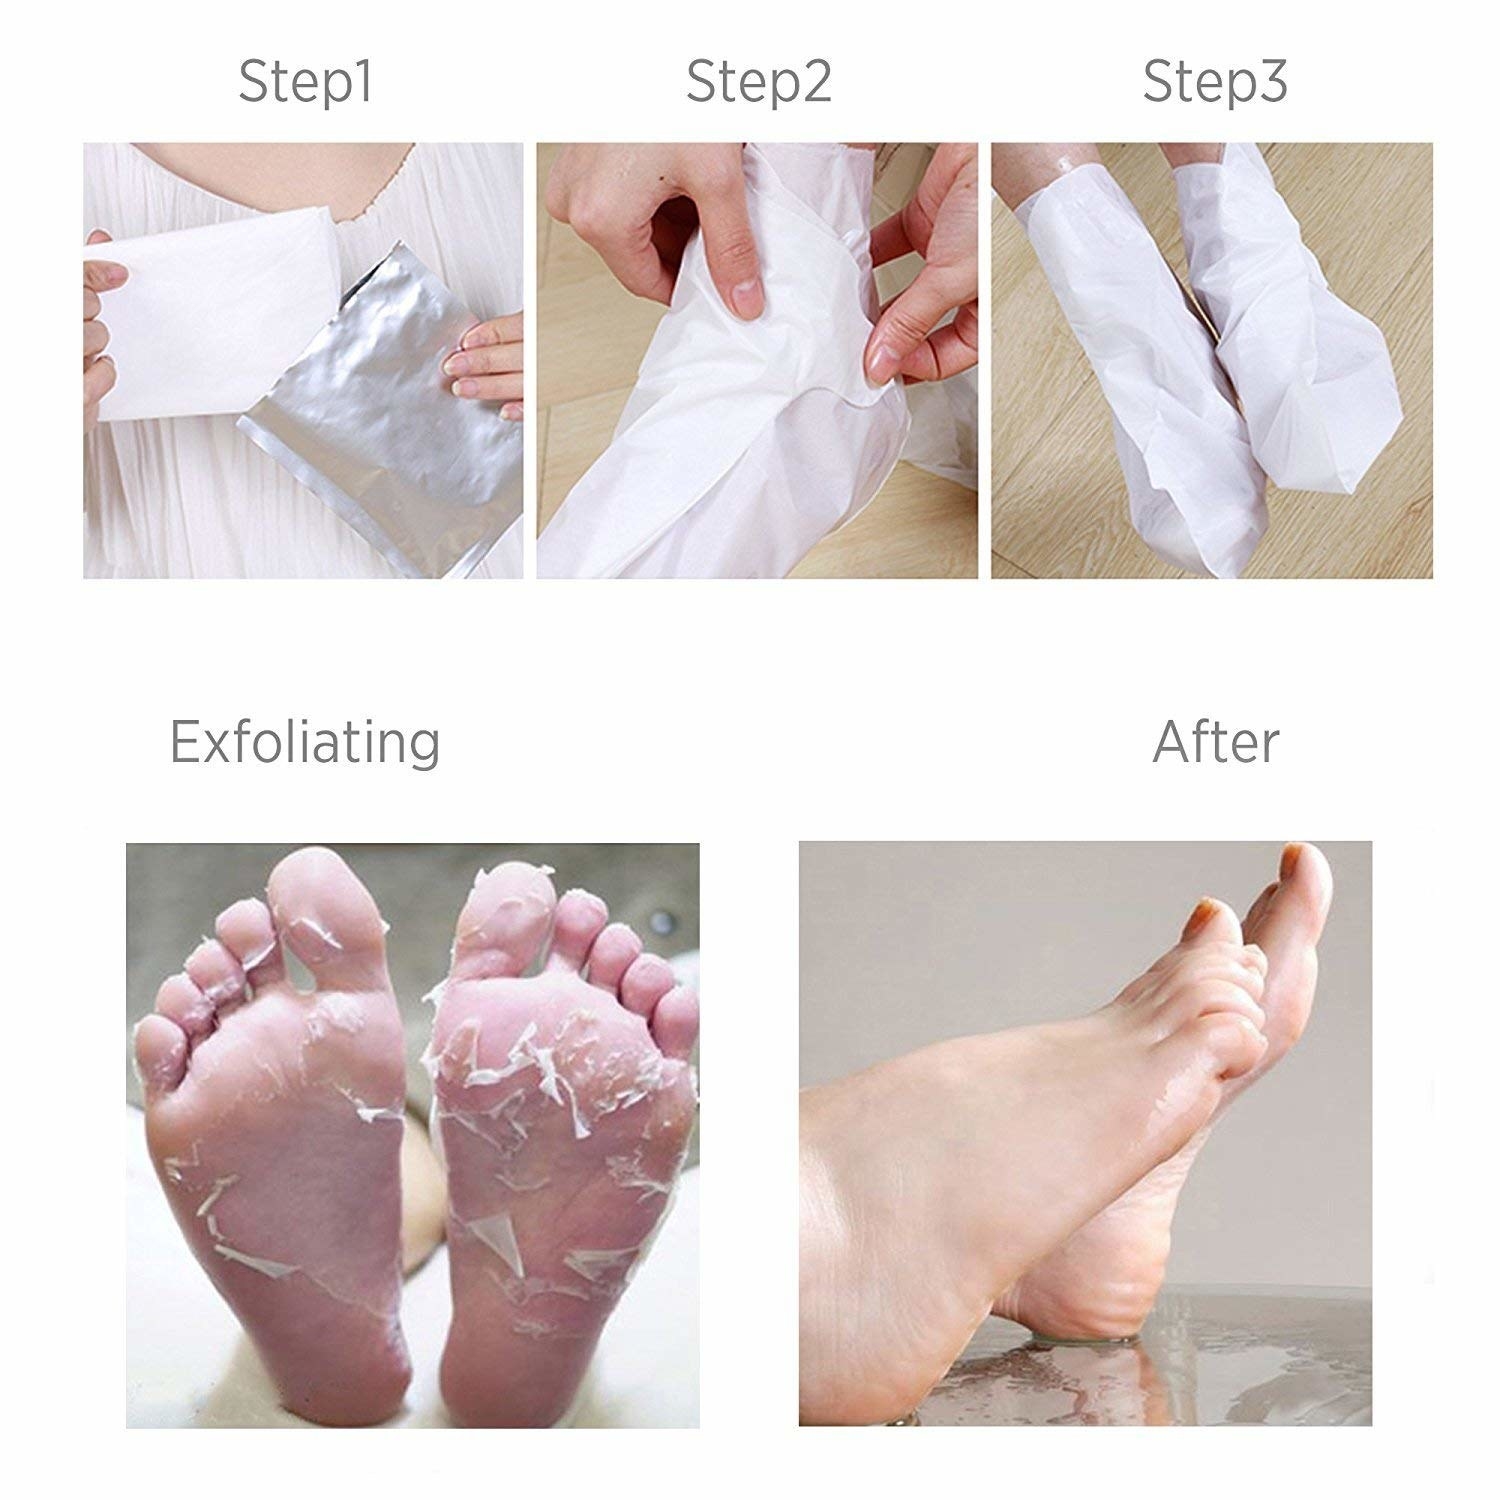 Images depicting a model putting the boot-shaped masks on their feet, the dead skin shedding from their feet, and an after image of their feet smooth 